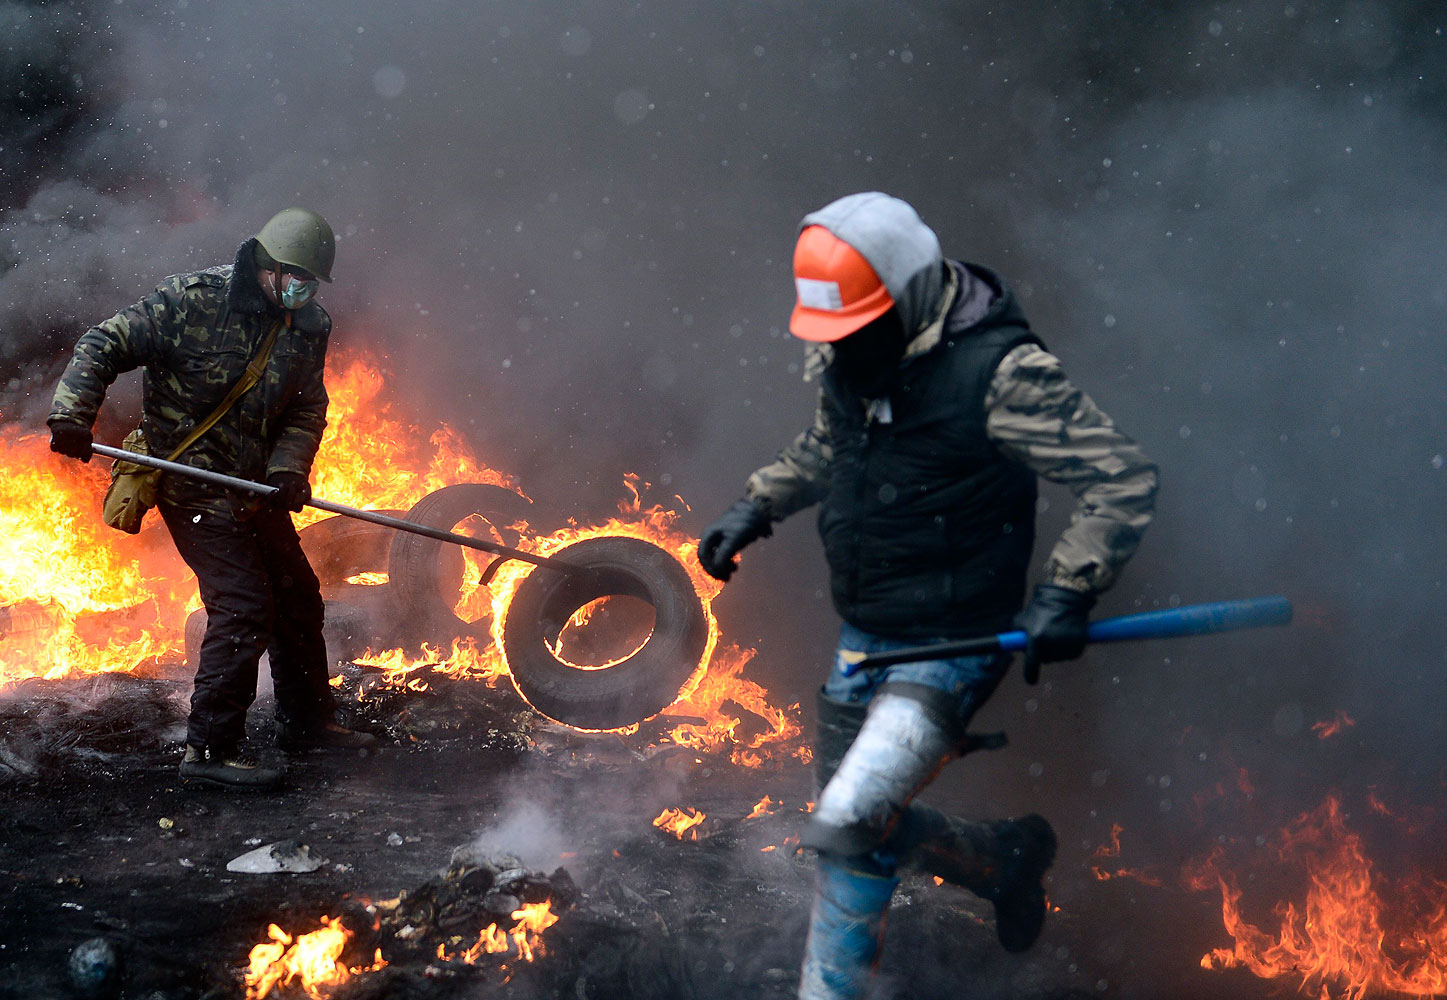 Three people were reported dead in Kiev on Wednesday morning, during clashes between police and demonstrators against the government's anti-protest law in Kiev, Jan. 22, 2014.